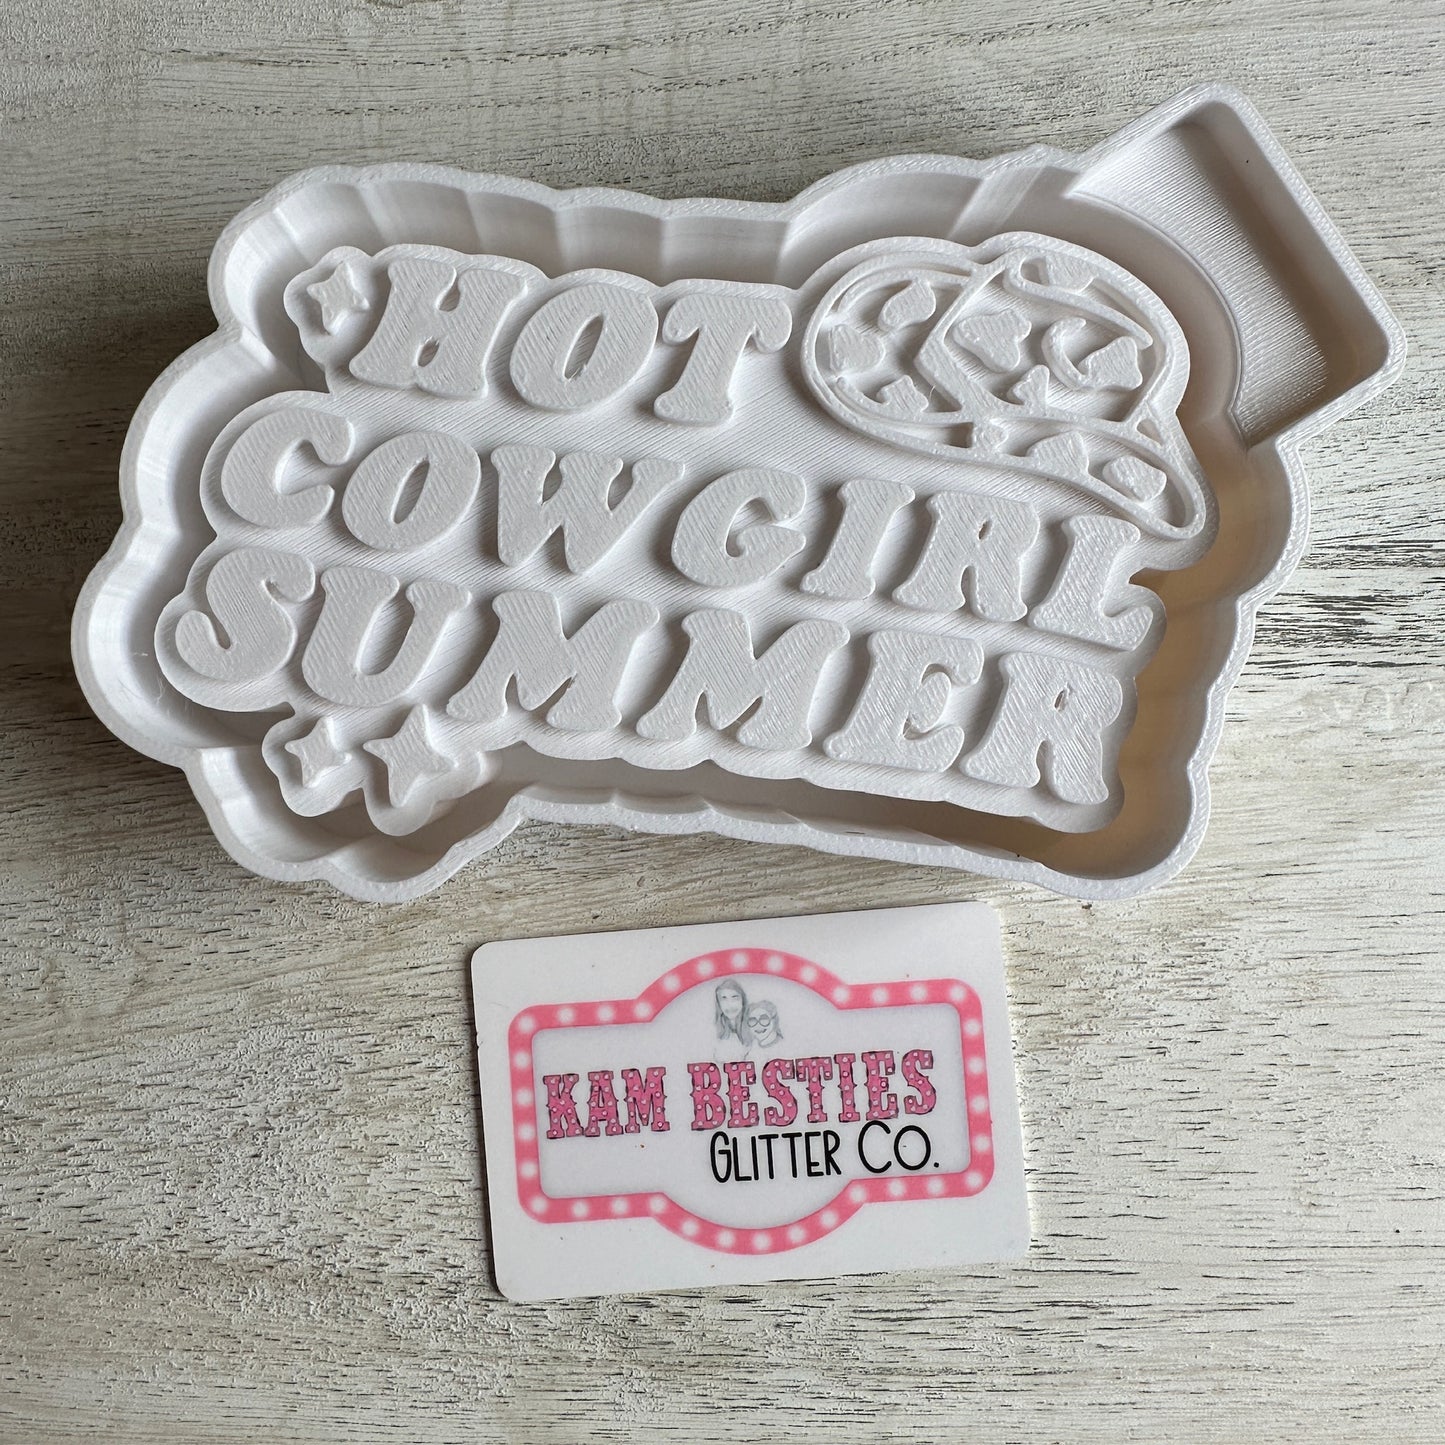 Hot cowgirl summer mold full size